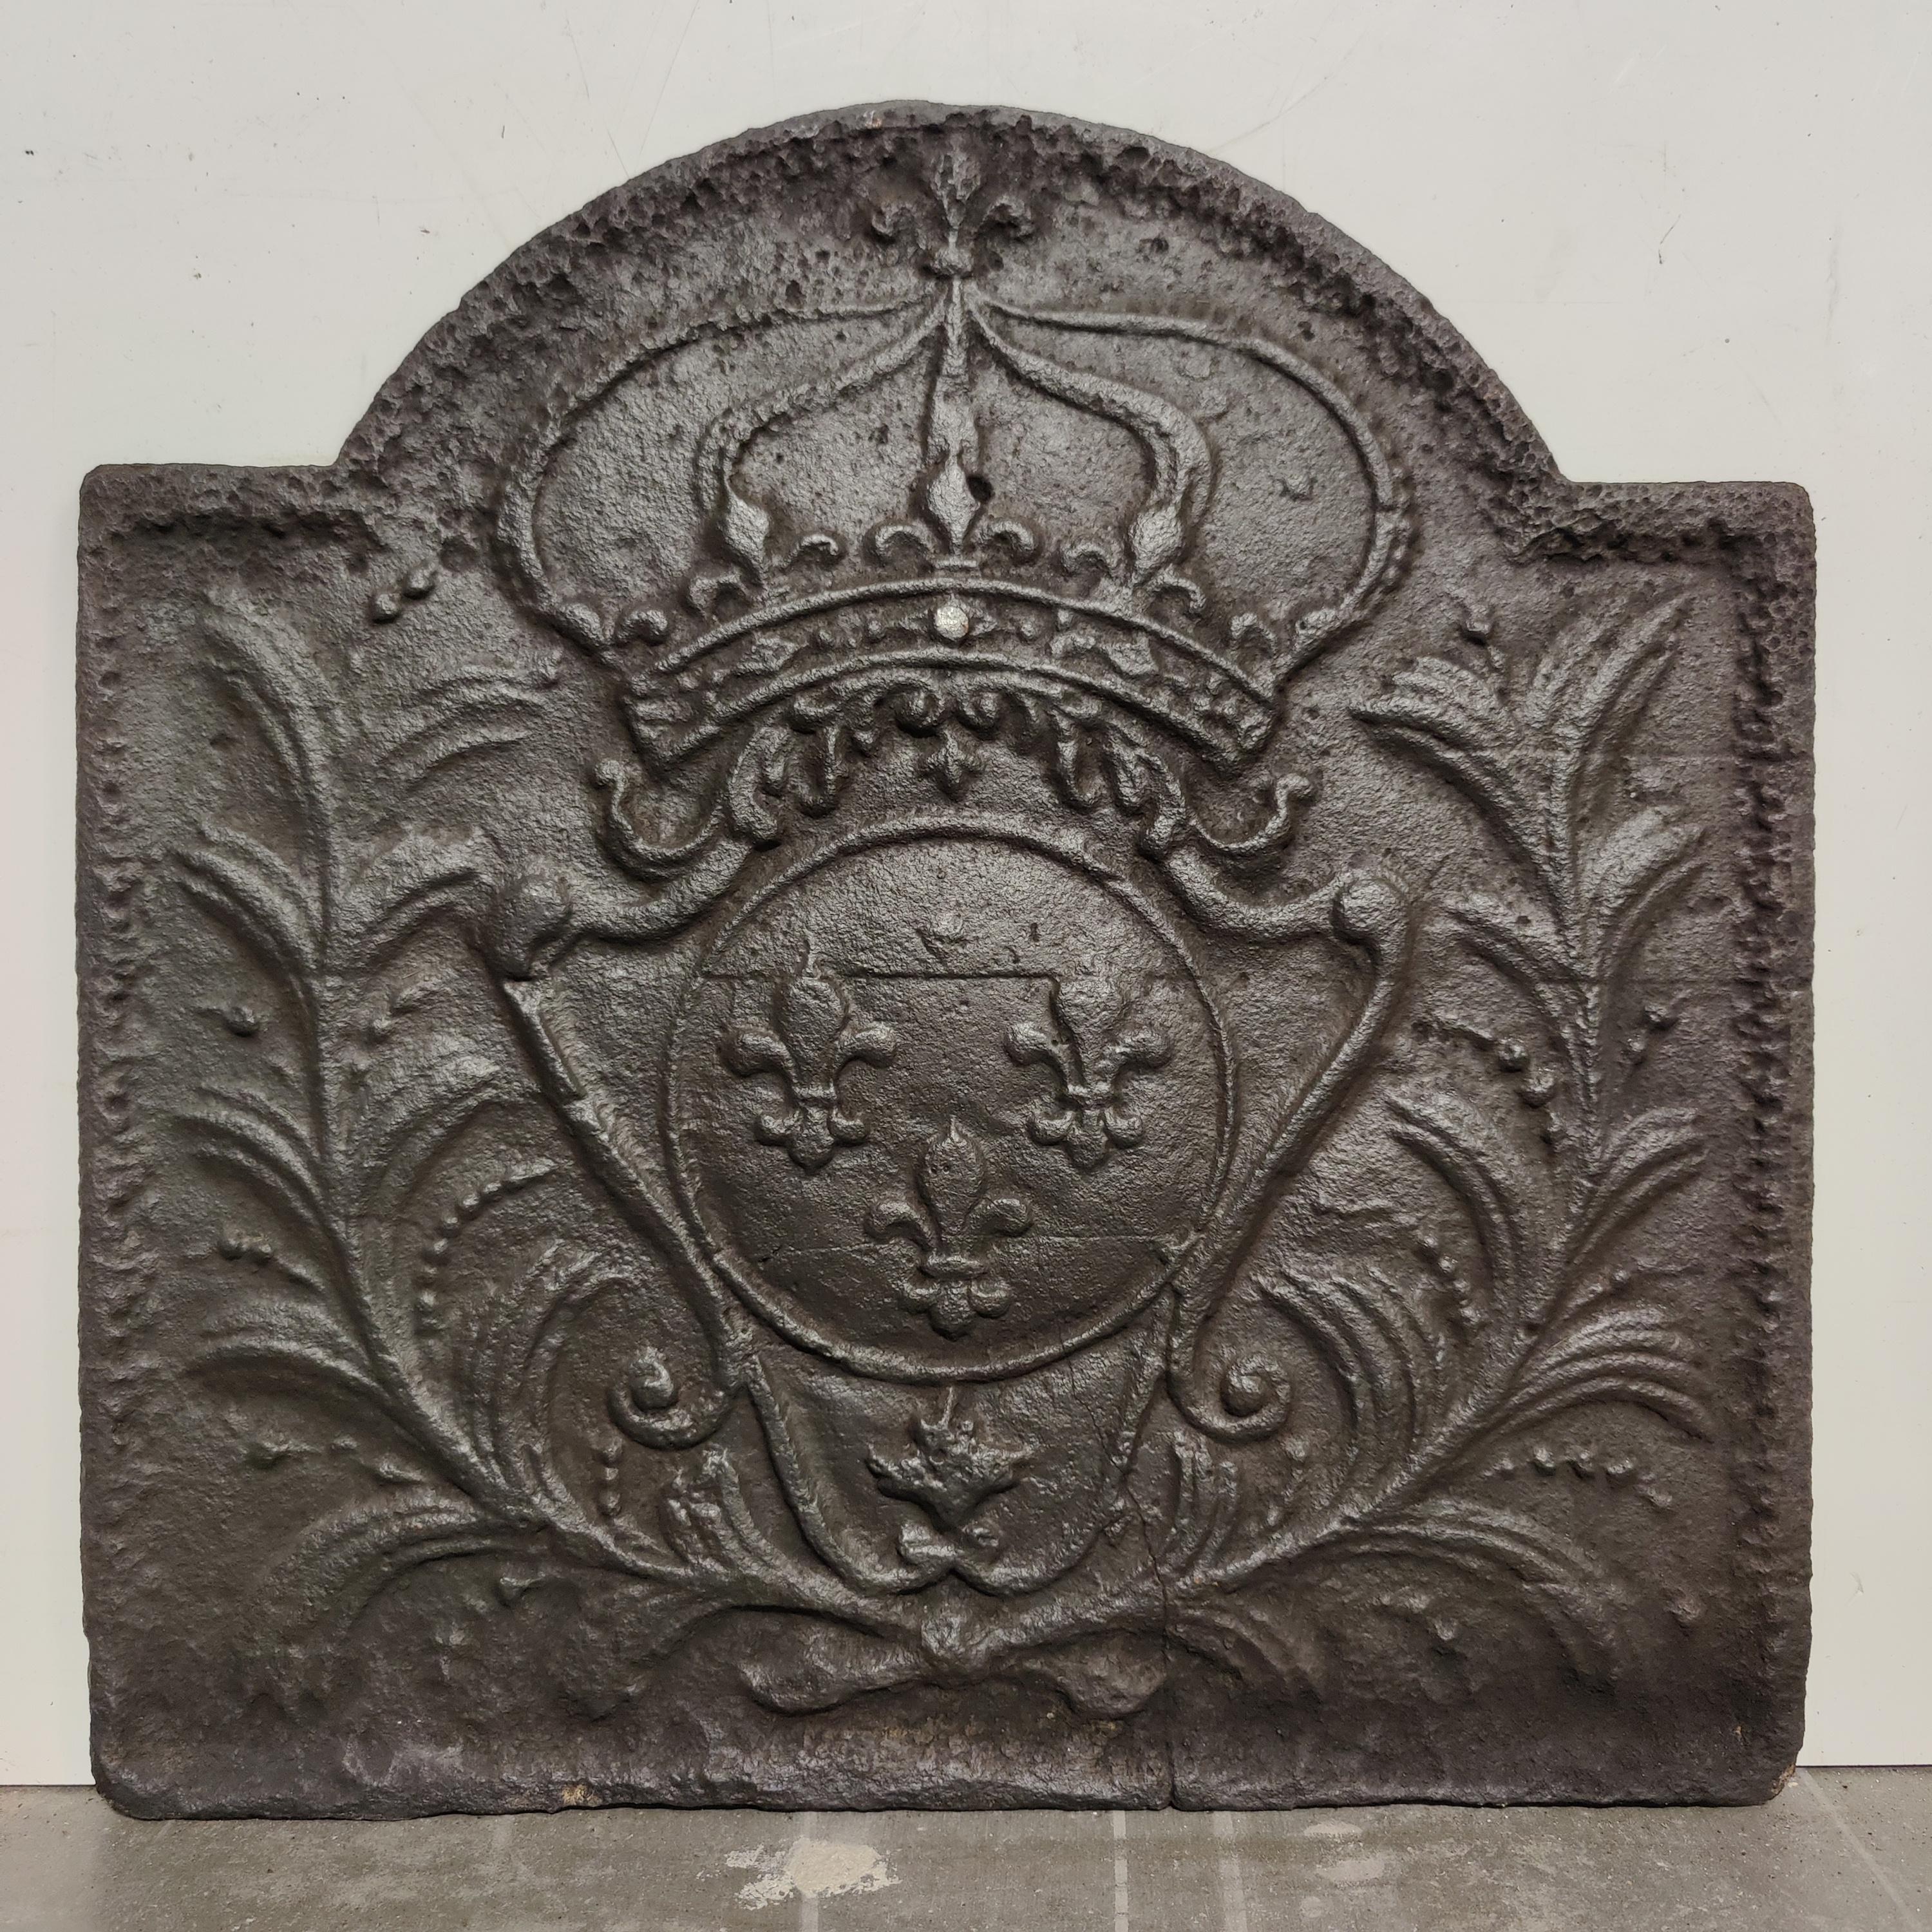 Antique fireback / backsplash, coat of arms house bourbon.

Nice cast iron antique fireback displaying the coat of arms of House Bourbon.
A European dynasty of French origin, a branch of the Capetian dynasty, the royal House of France.

Very